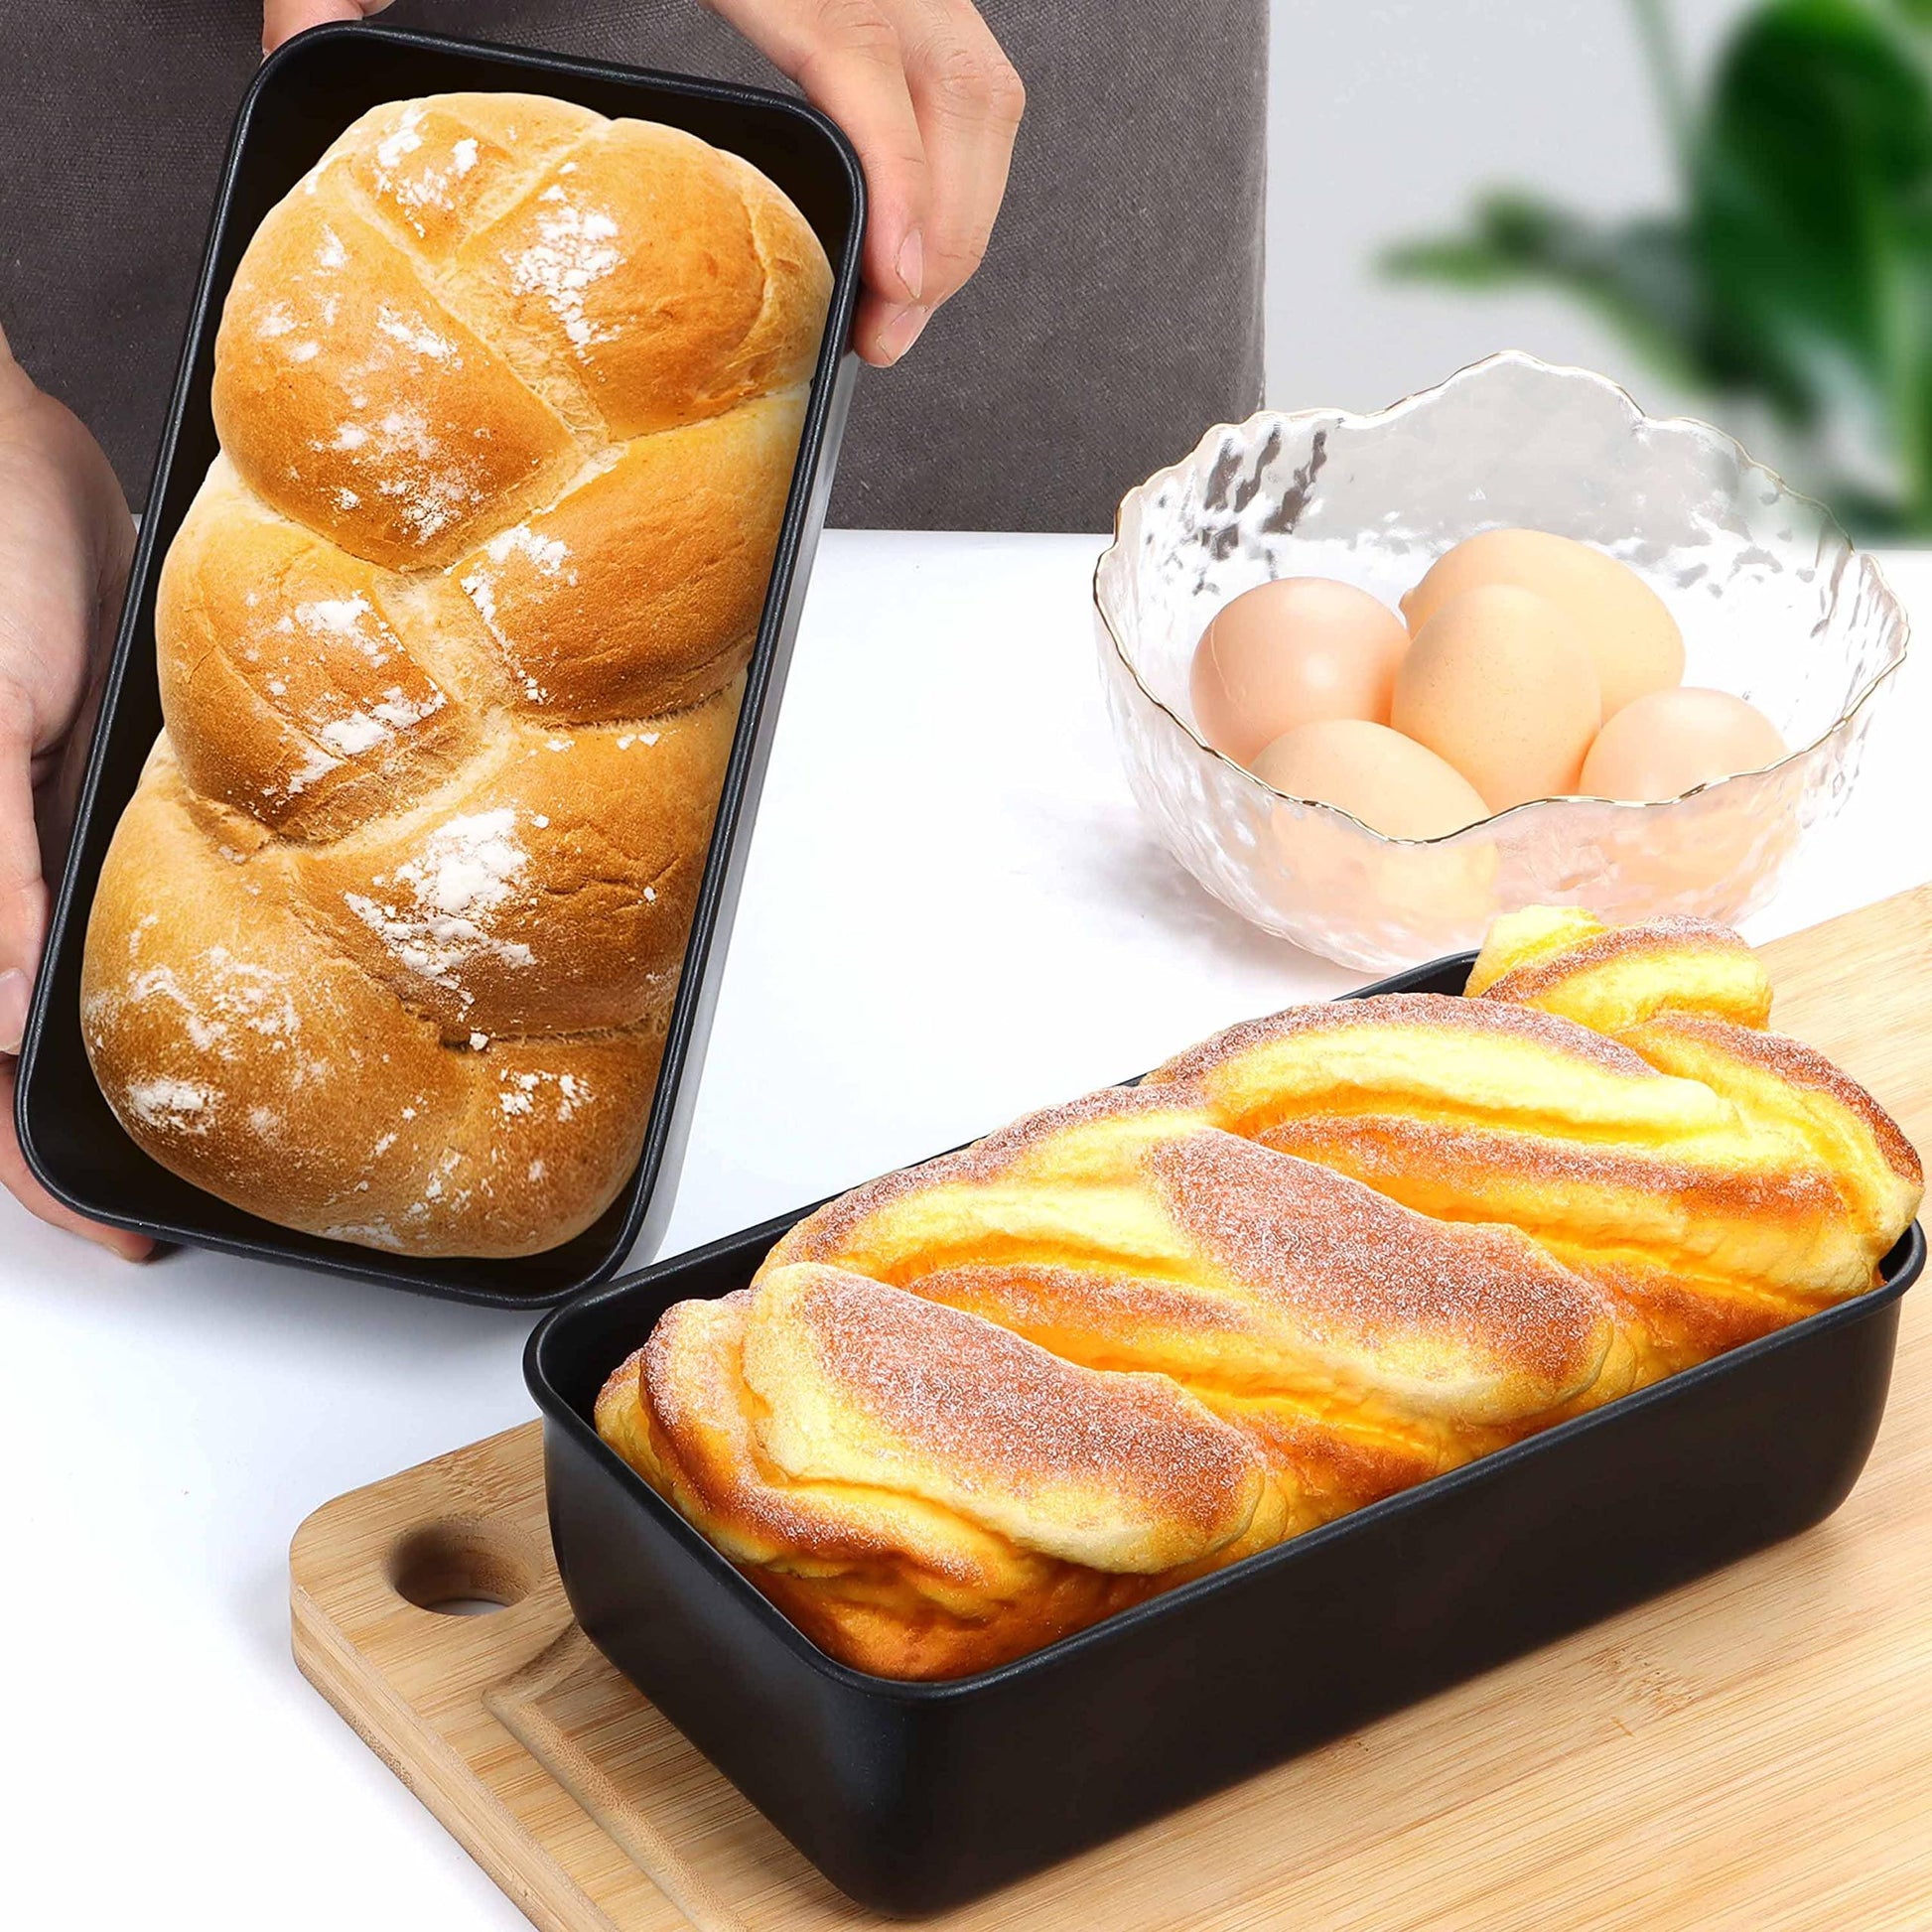 Homikit Loaf Pan Set of 3, 9 x 5 Inch Stainless Steel Bread Loaf Pans for Baking Homemade Banana Sandwich Cake, Medium Metal Meat Loaf Pan Tins Nonstick & Healthy, Oven Safe - CookCave